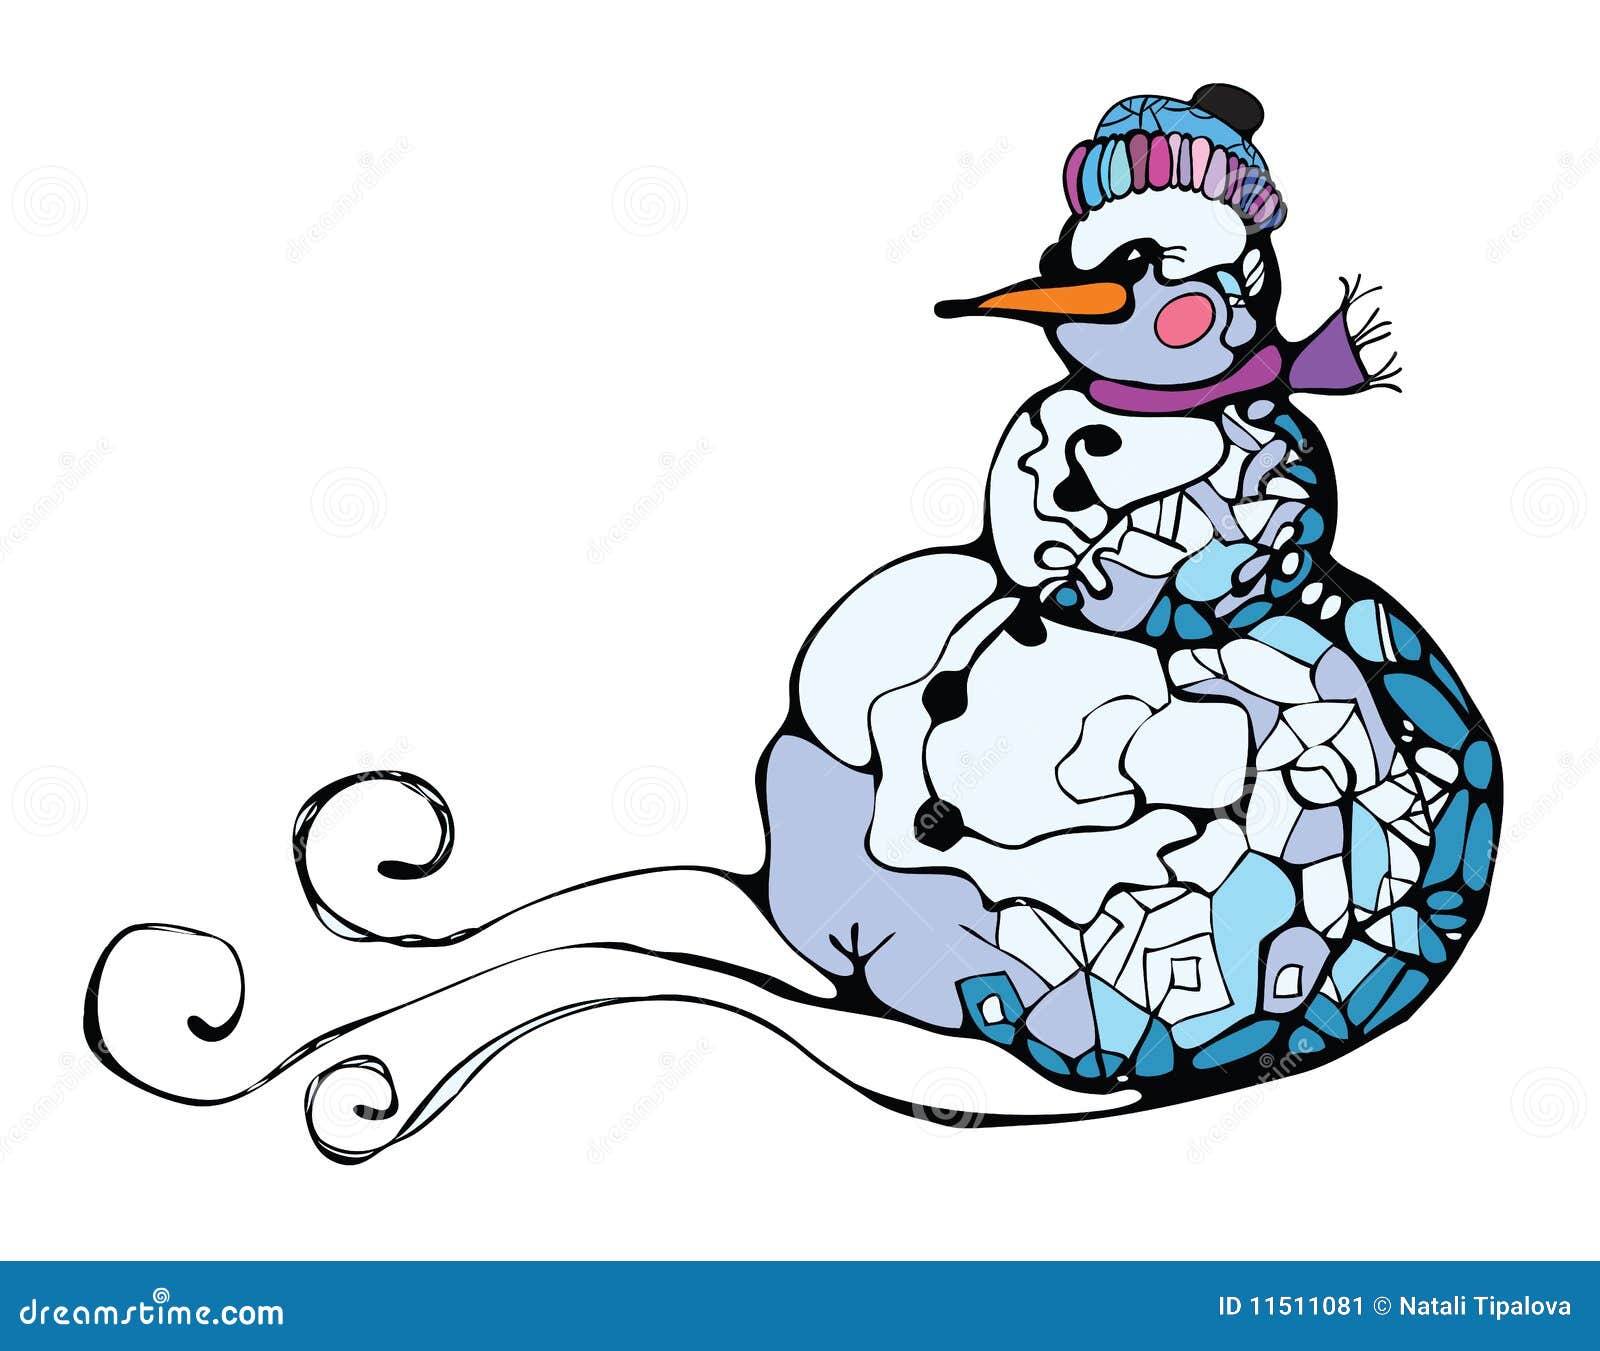 The image of a snowball. stock vector. Illustration of holiday - 11511081